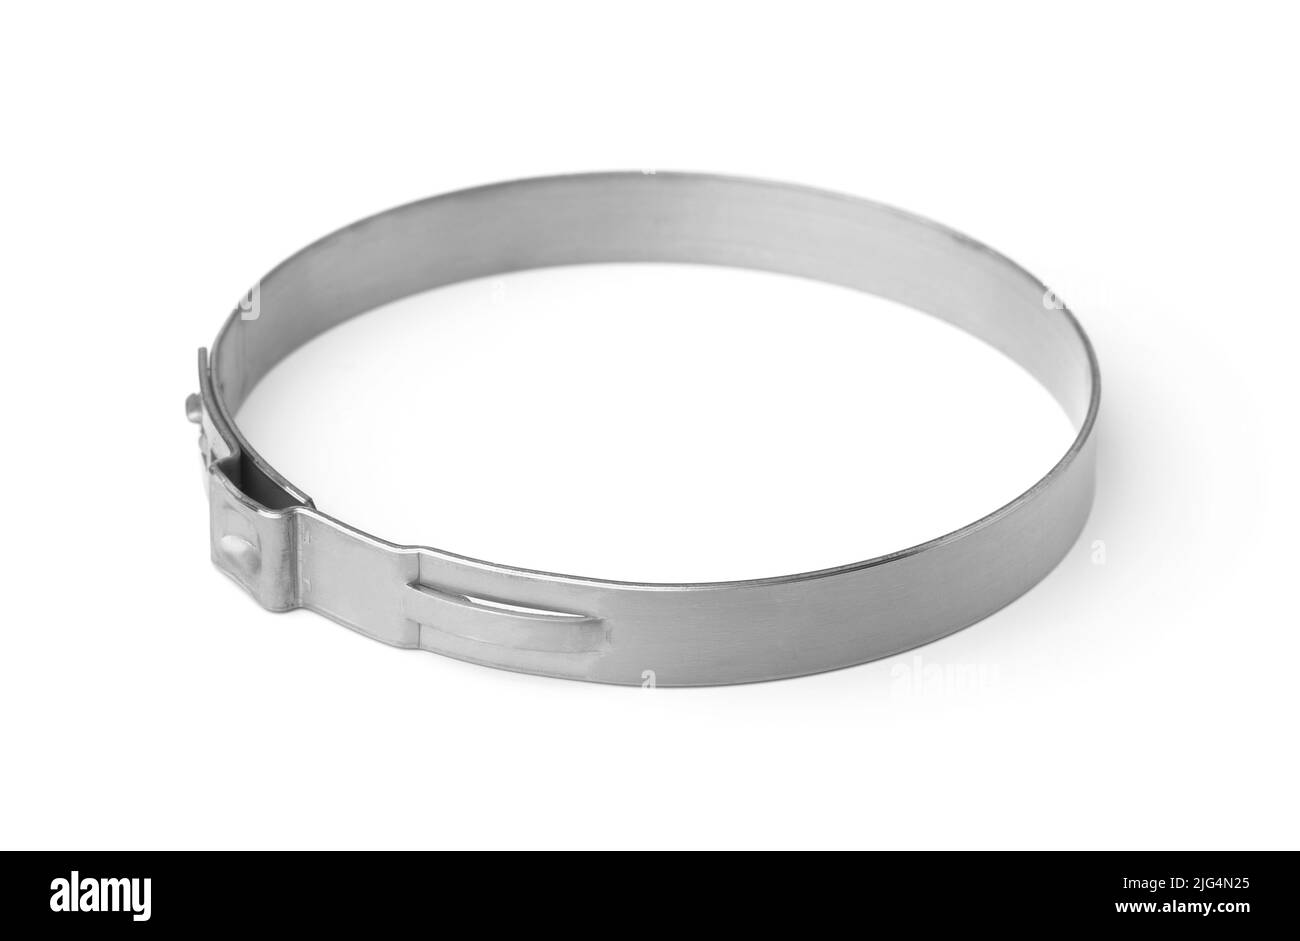 Stainless steel hose clamp ring isolated on white Stock Photo